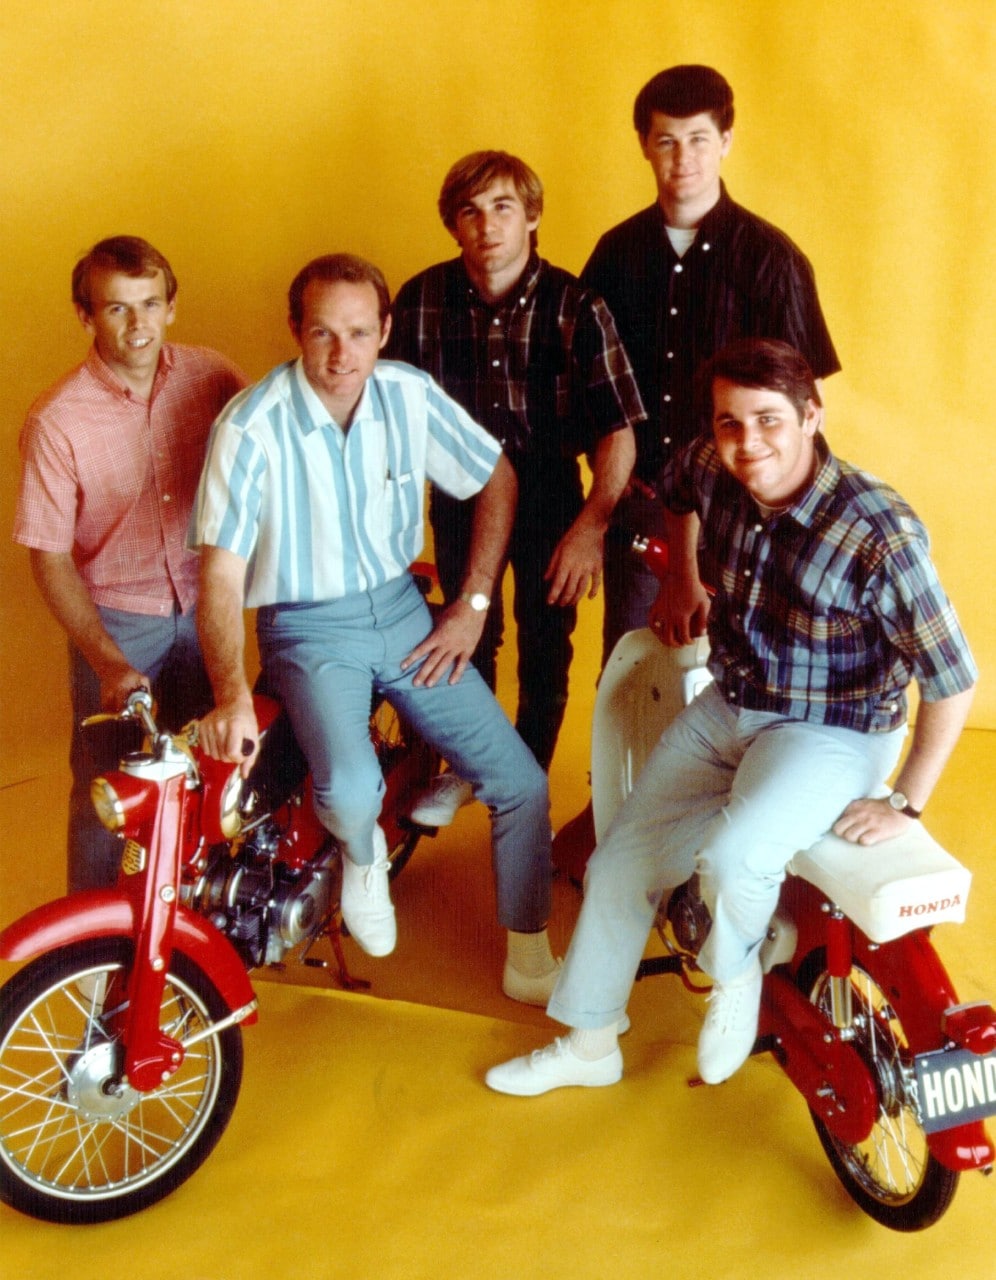 a band standing in a bright yellow room smiling at the camera